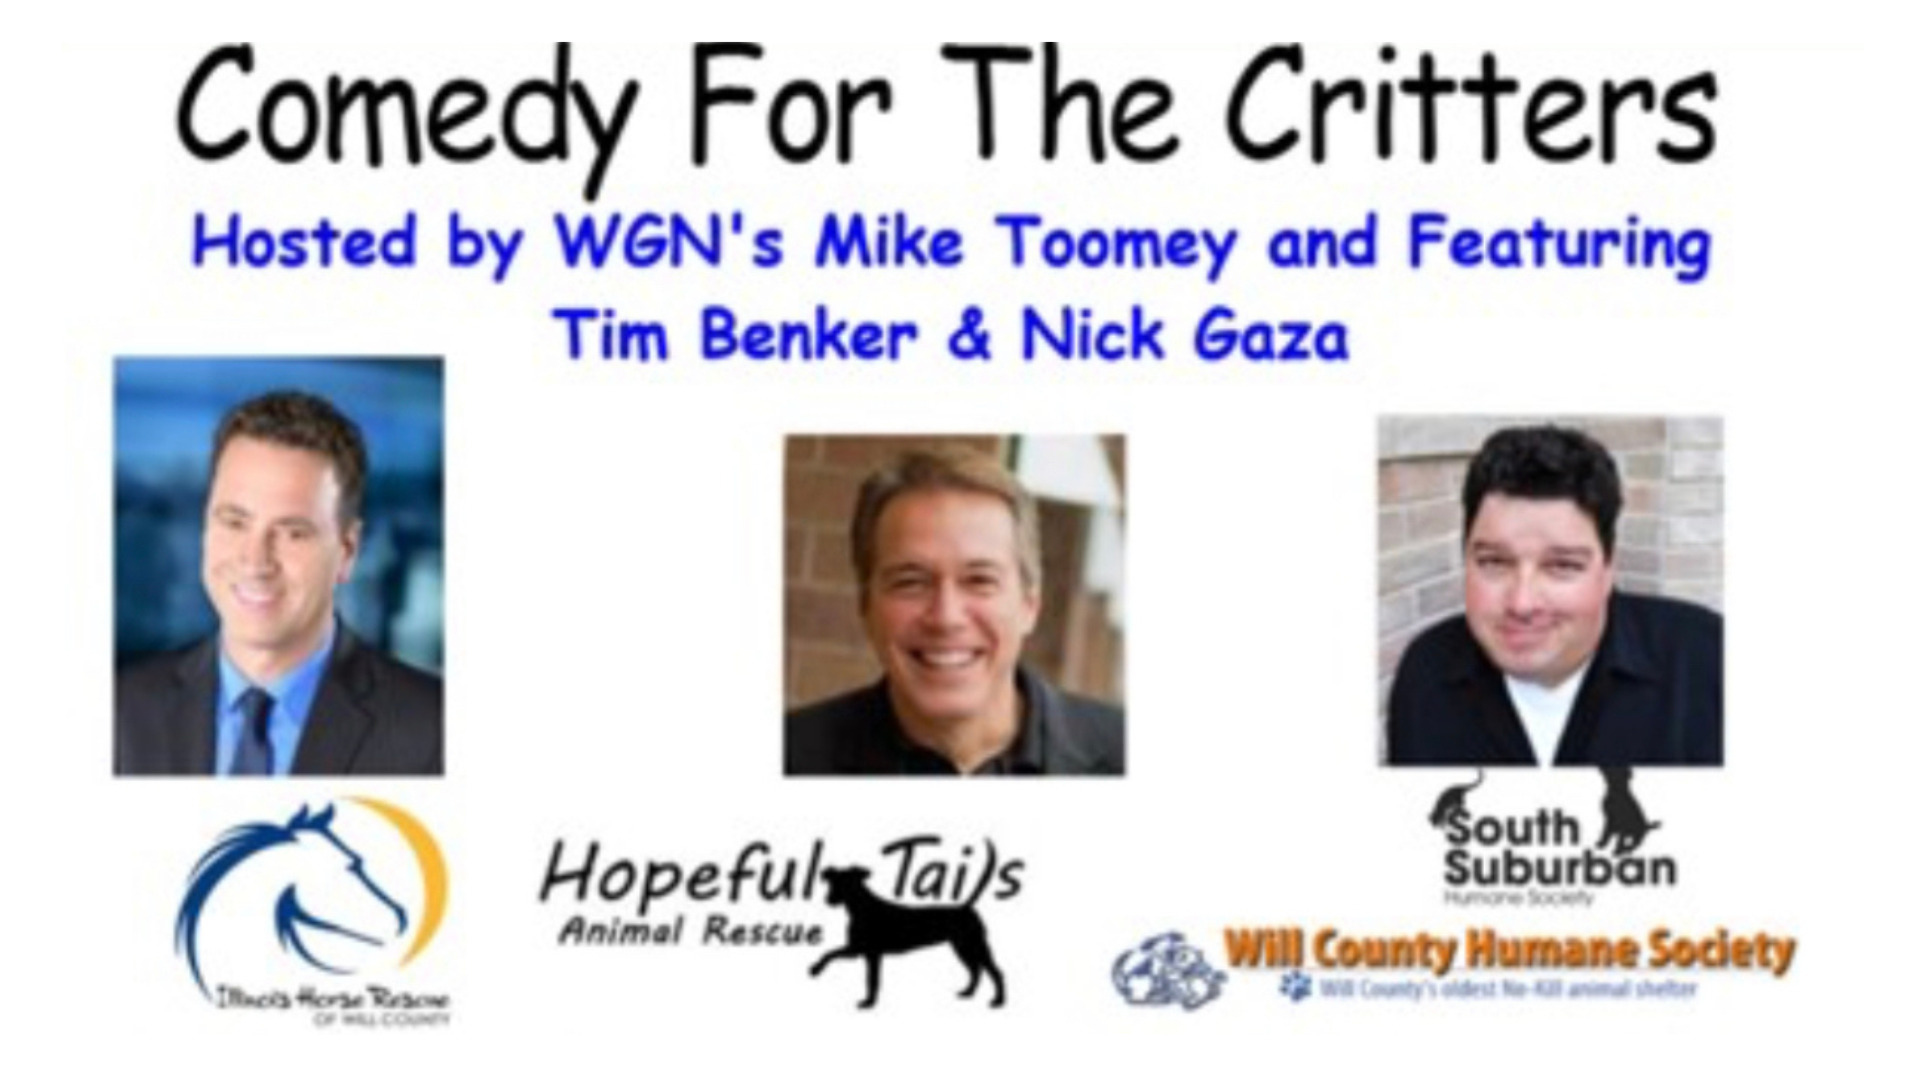 Comedy for Critters Event